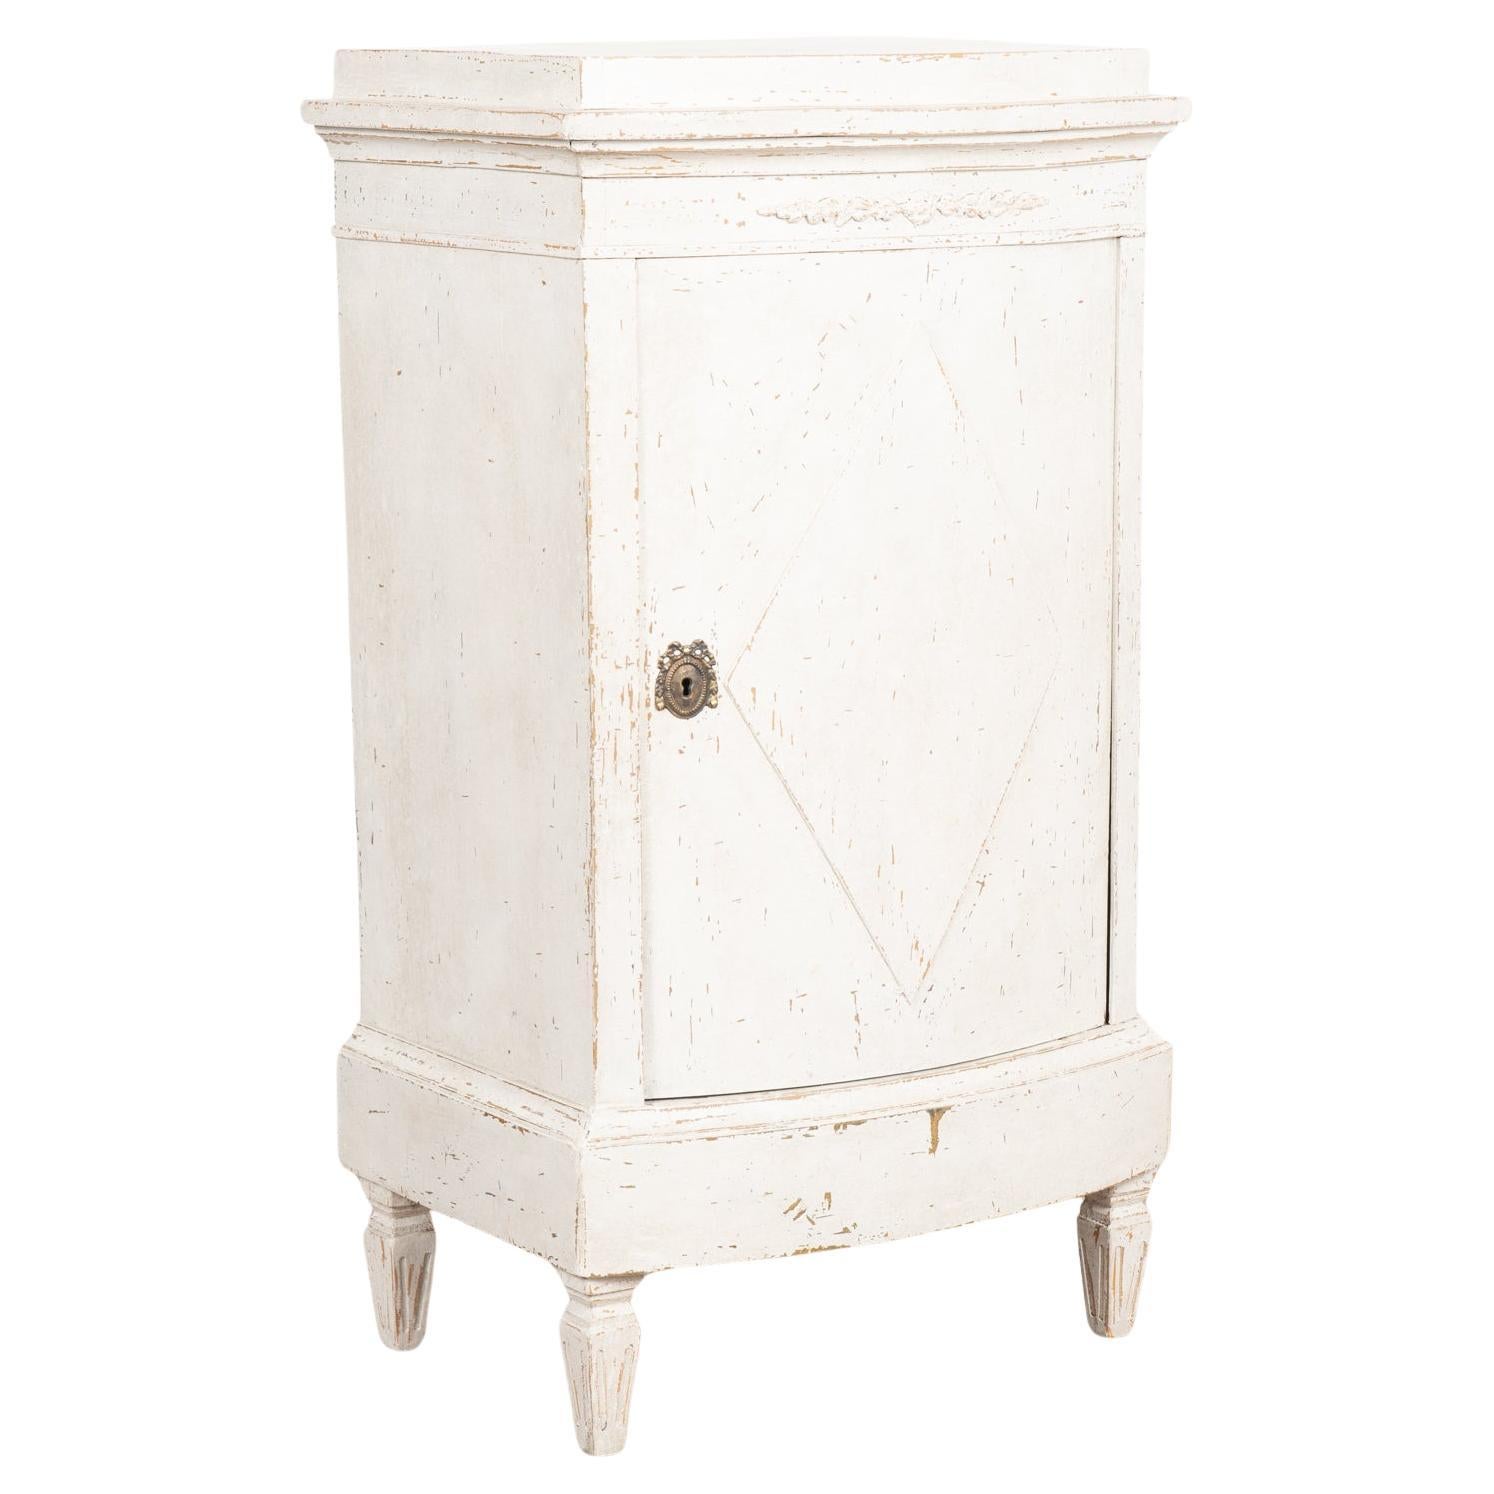 Small White Painted Swedish Bow Front Cabinet, circa 1860